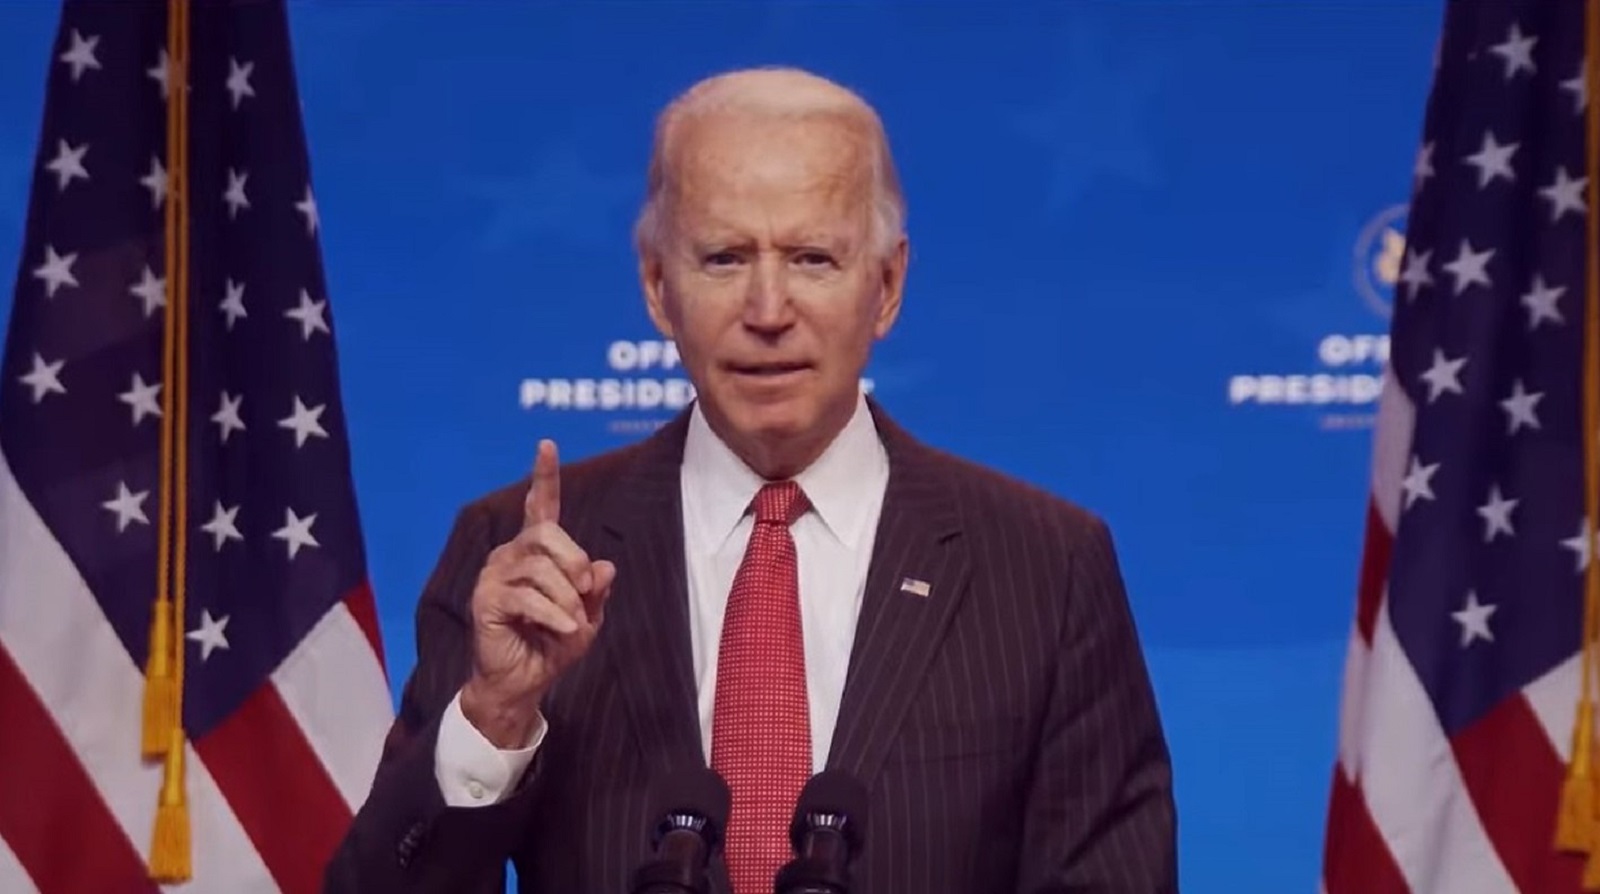 epa08830998 A frame grab from a handout video released by the Office of the President Elect shows US President-Elect Joseph R. Biden addressing the media during a press conference in Wilmington, Delaware, USA, 19 November 2020 (issued 20 November 2020). Georgia state authorities confirmed 19 November US President-elect Joe Biden won the the election in Georgia following a recount. It was the first time the Democrats won a presidential election race in Georgia since 1992 when Bill Clinton was elected.  EPA/OFFICE OF THE PRESIDENT ELECT/HANDOUT BEST QUALITY AVAILABLE HANDOUT EDITORIAL USE ONLY/NO SALES